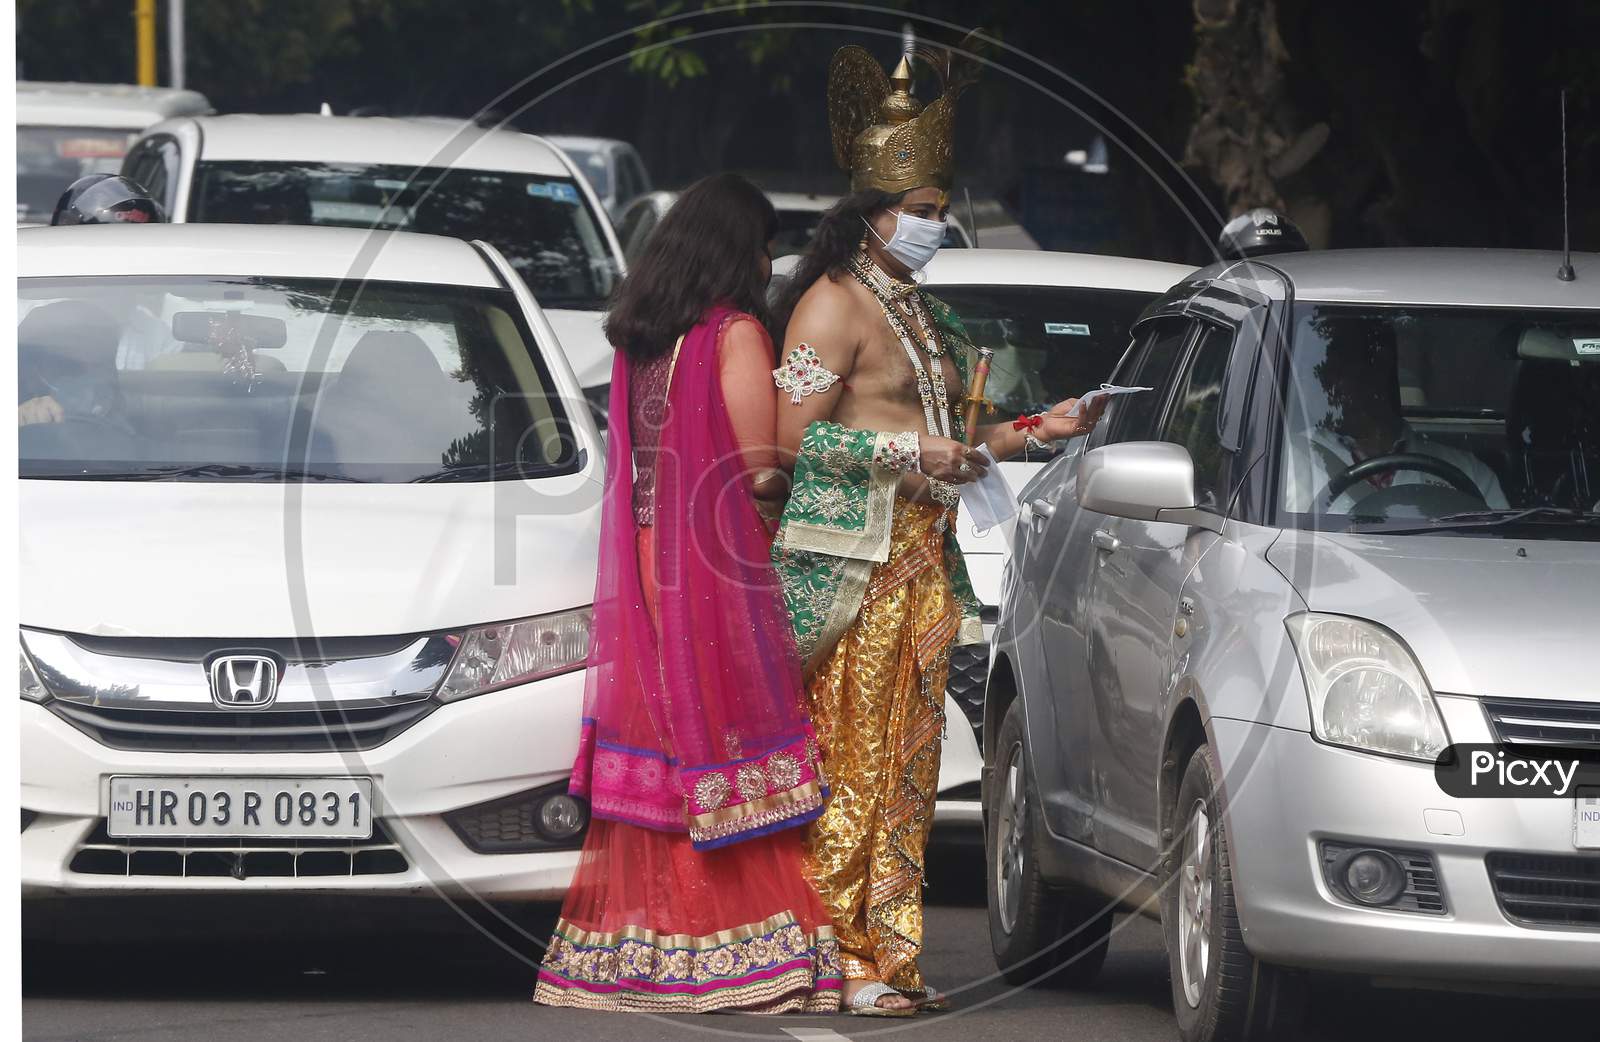 A man wears mask  dressed as Hindu Lord Krishna and a woman dressed his consort Radha, distribute  masks to people at a road during Janmashtami celebrations, in Chandigarh August 11, 2020